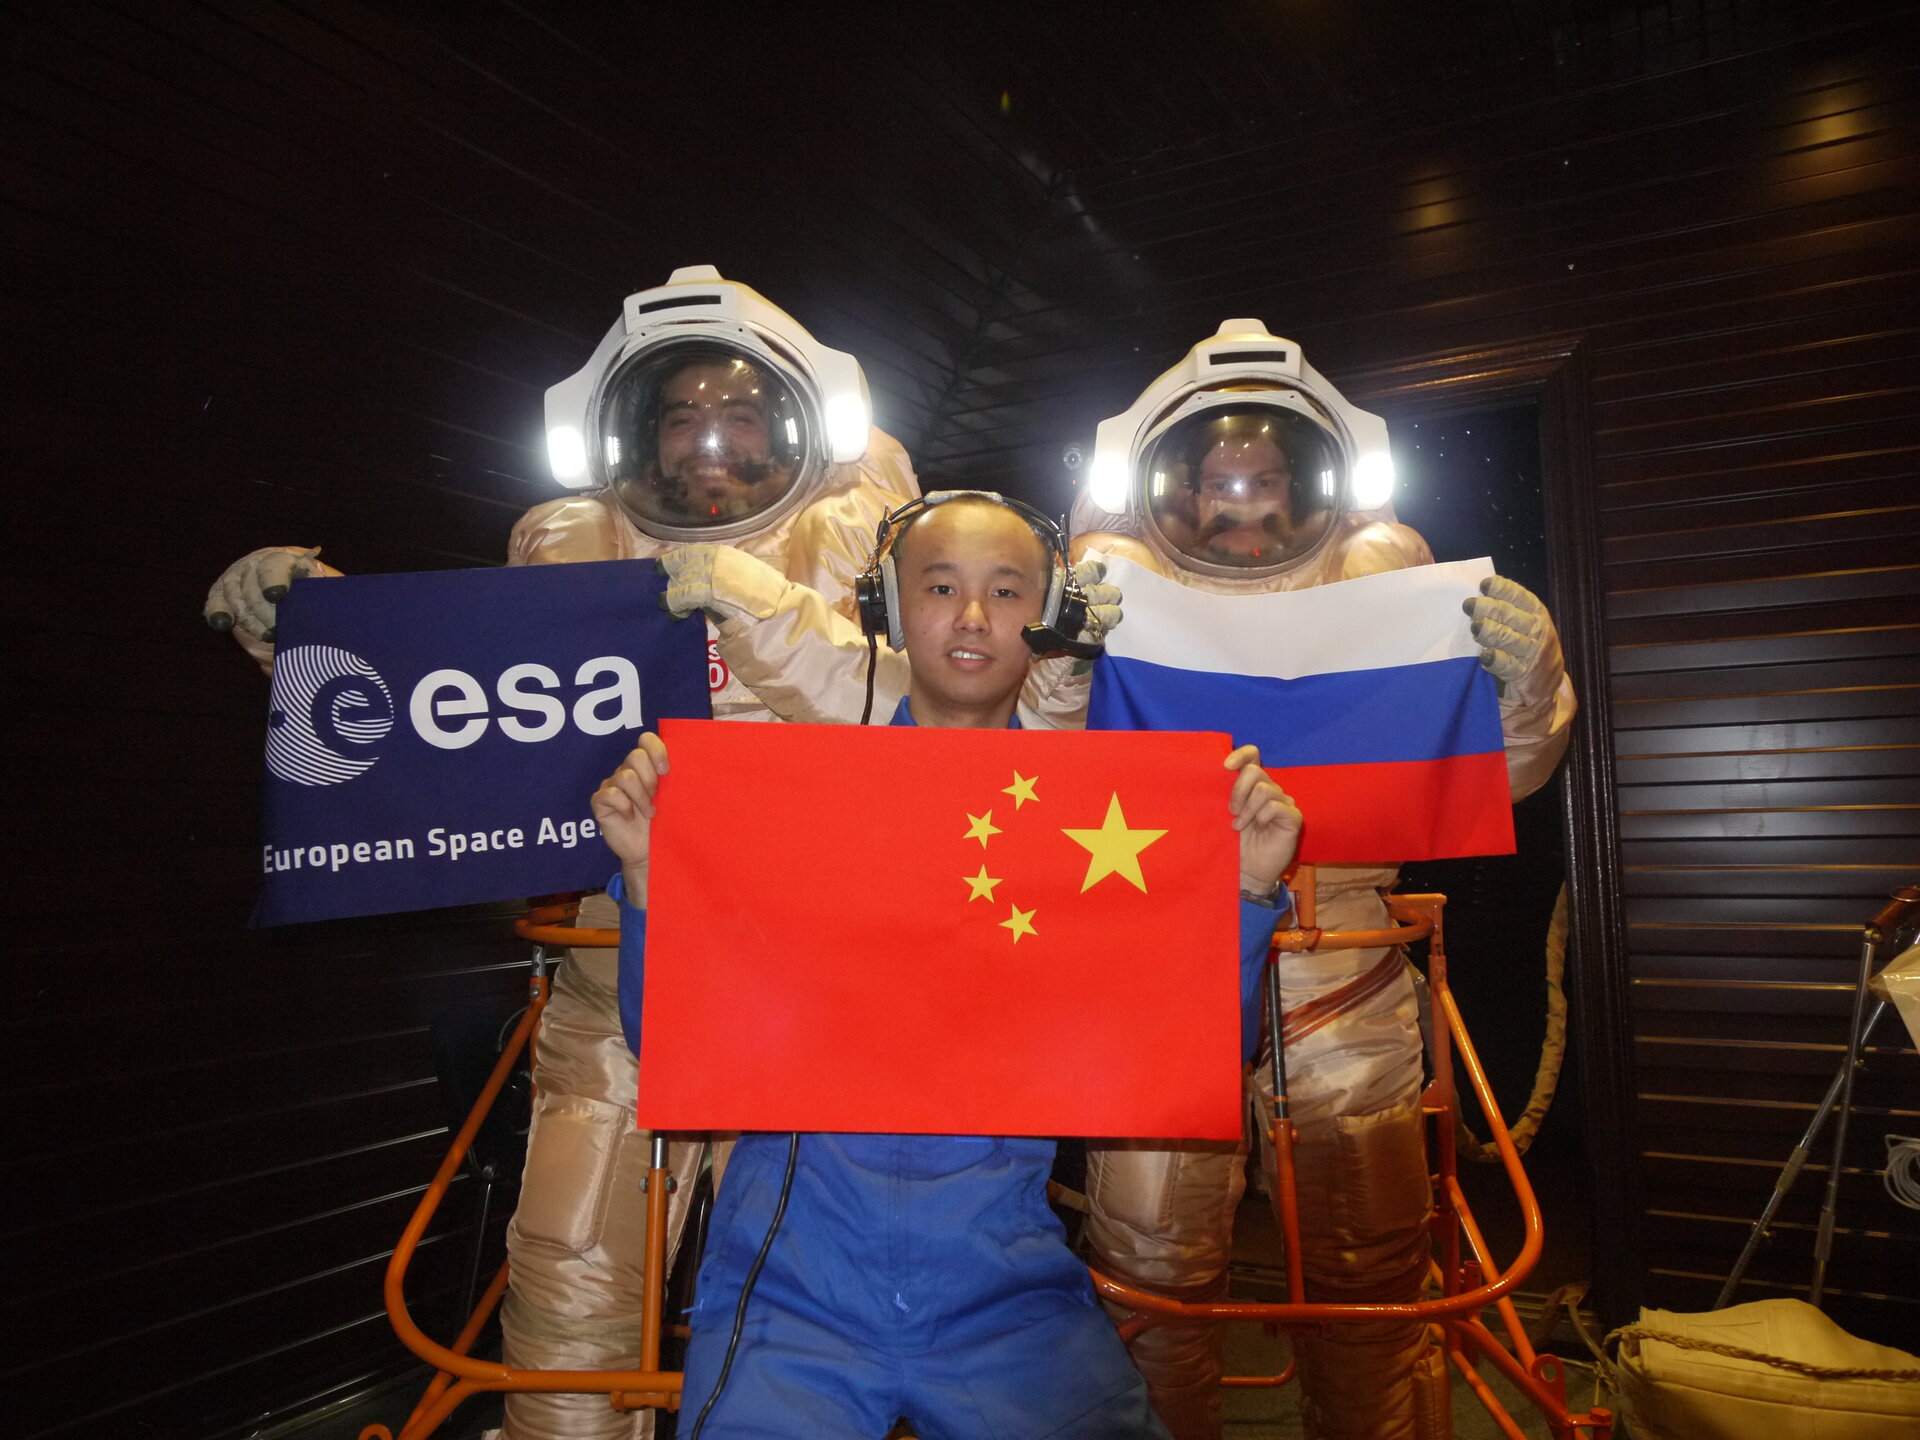 Diego, Alexandr and Wang with flags